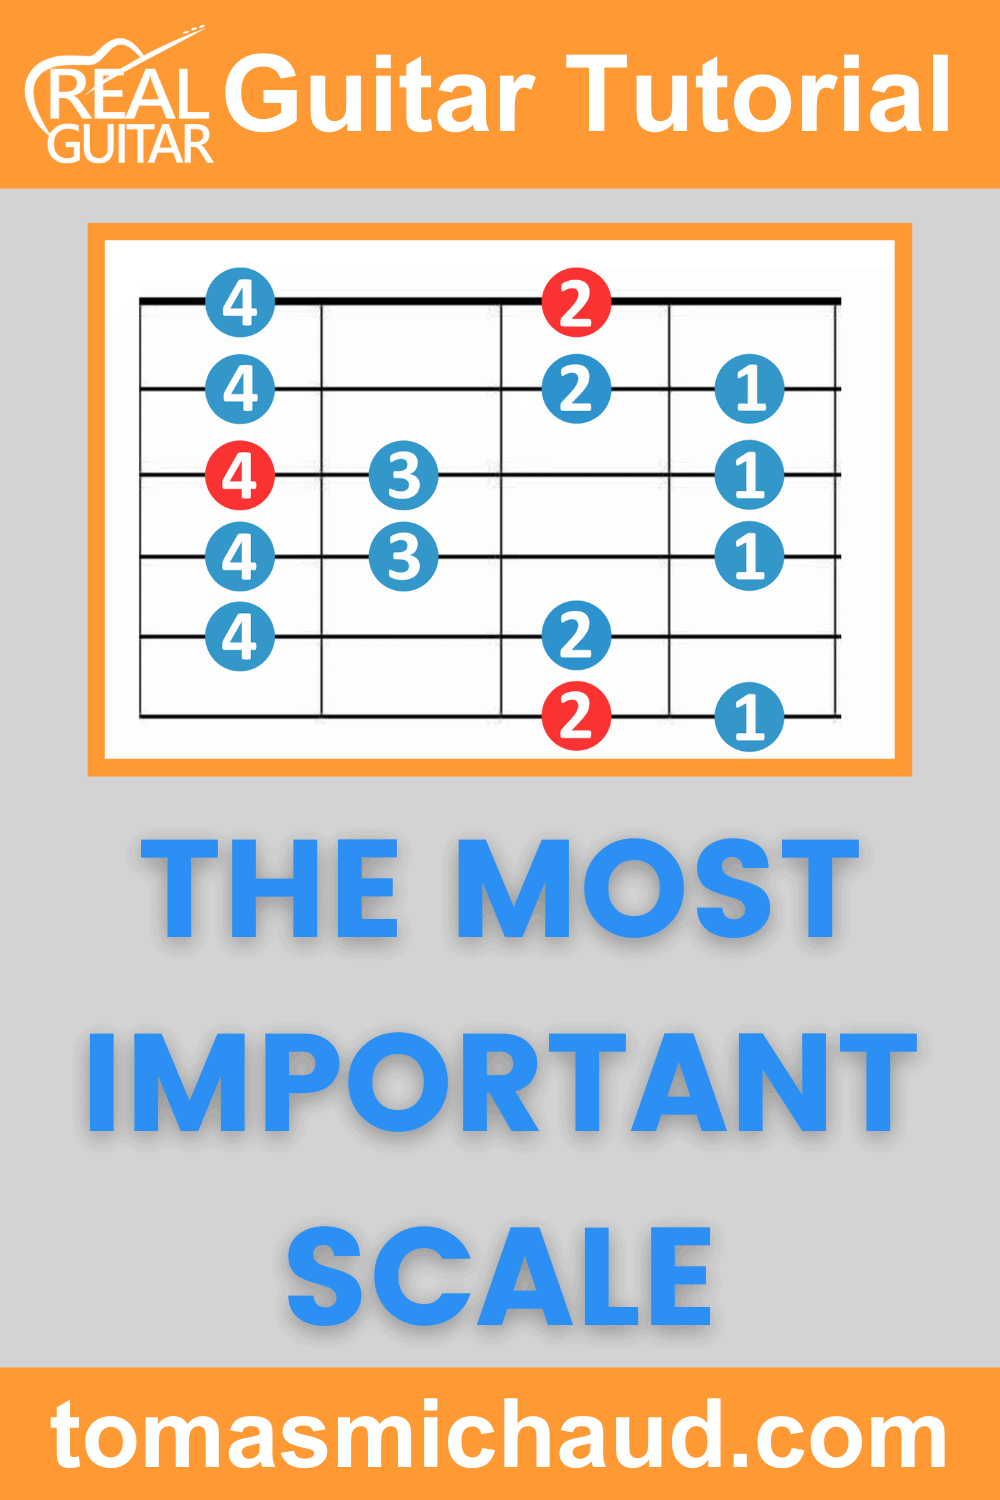 The Most Important Scale